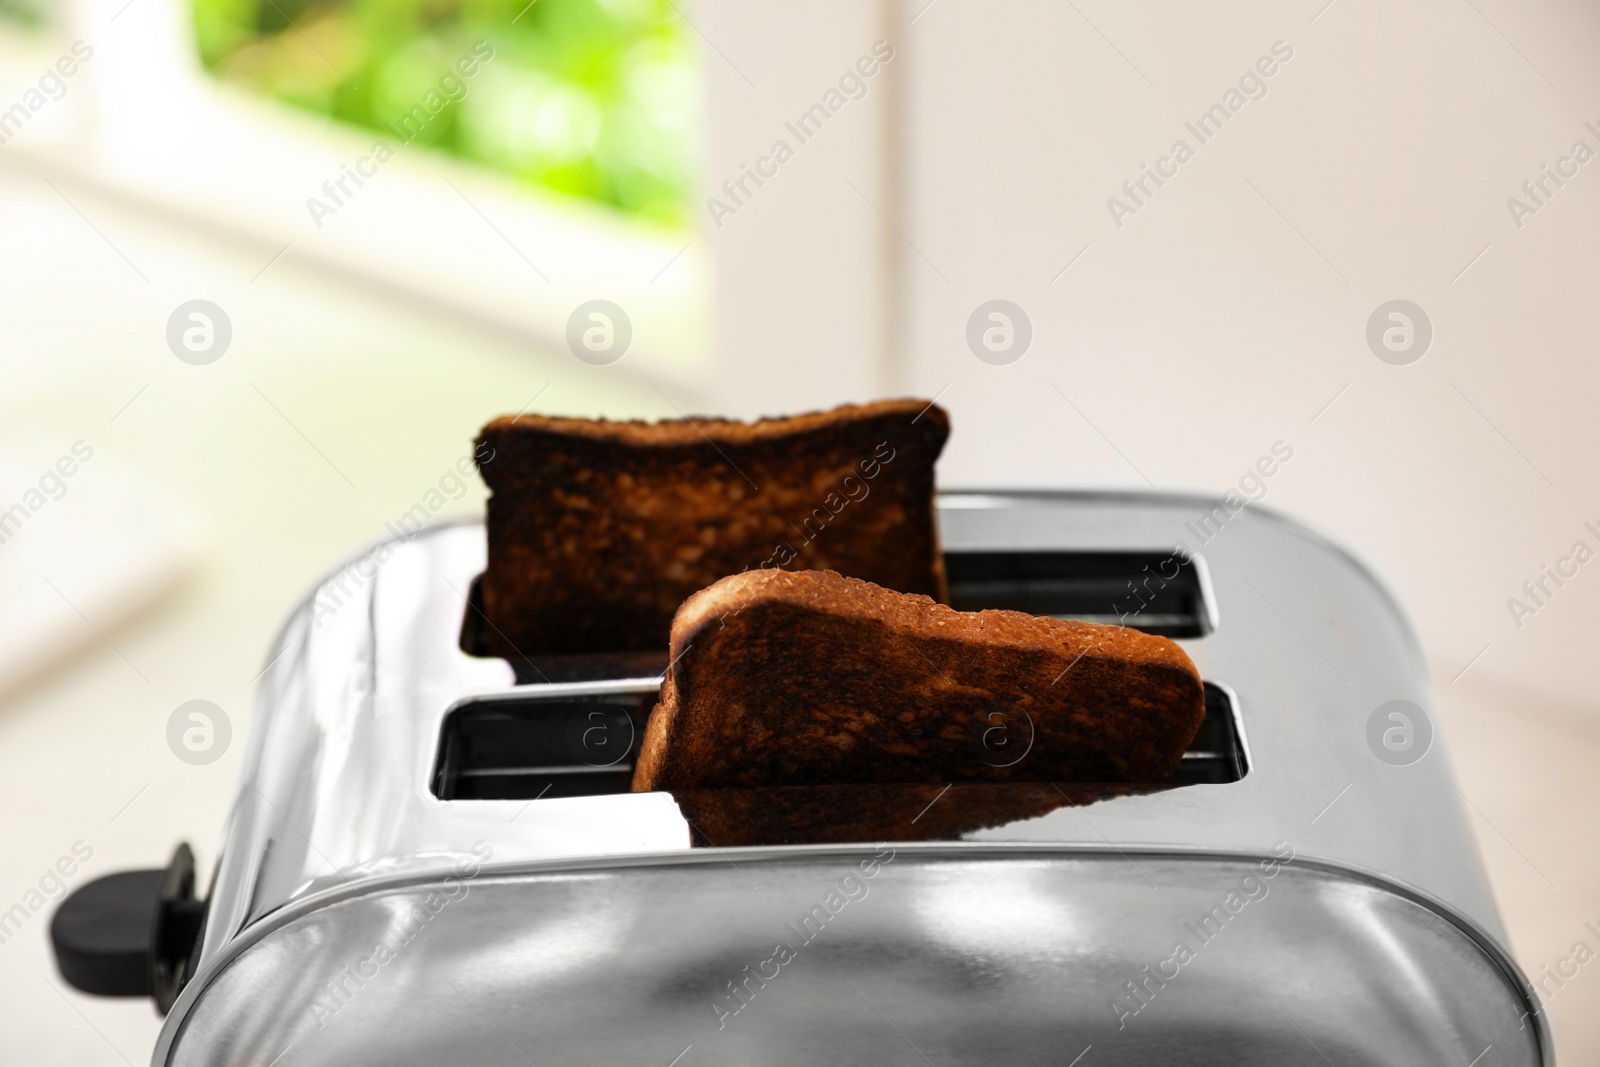 Photo of Modern toaster with slices of burnt bread against blurred background, closeup